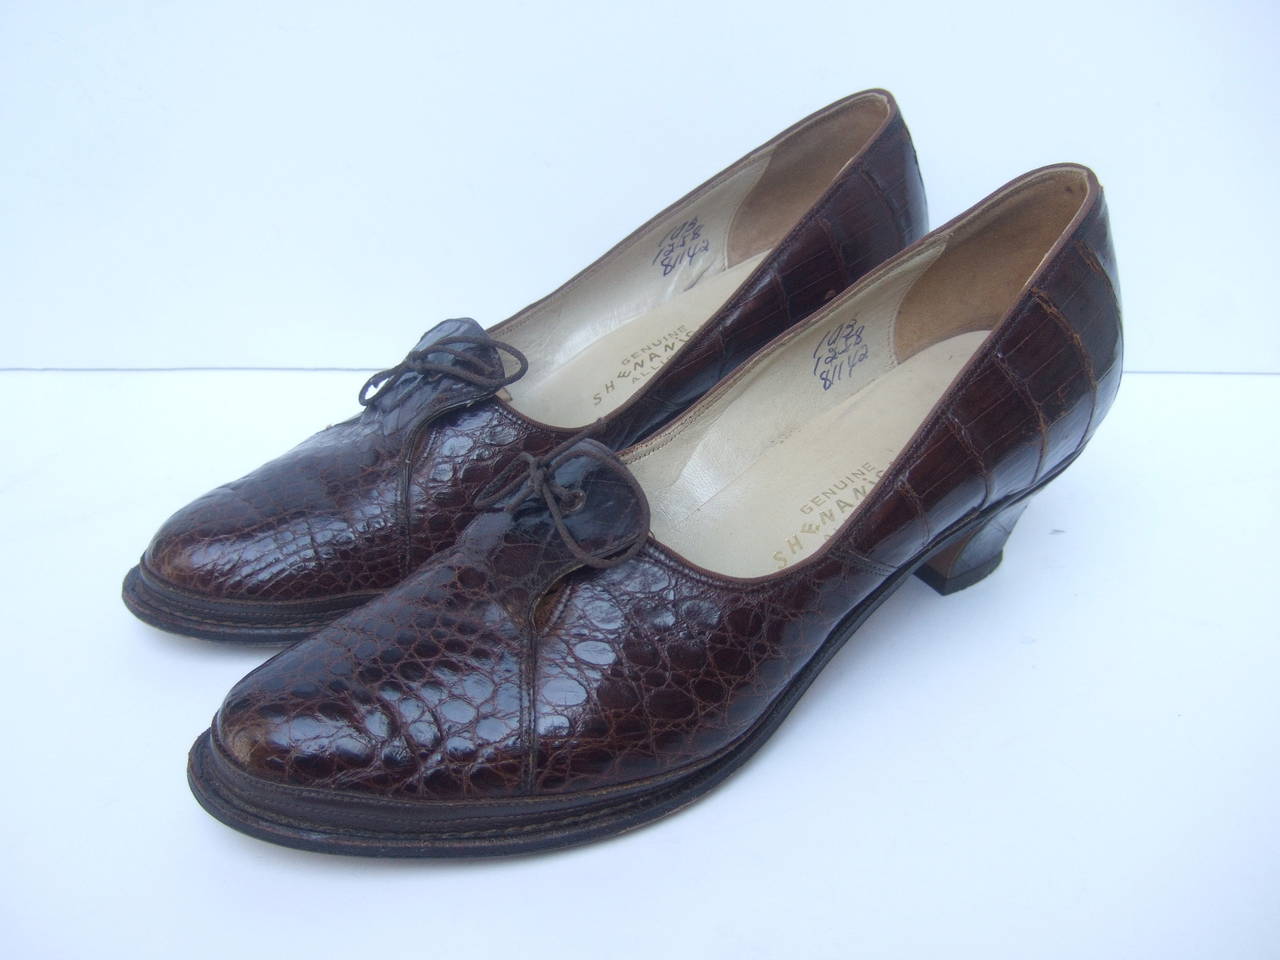 Genuine alligator retro brown pumps c 1950s
The stylish retro shoes are designed with mahogany brown alligator skin 
The reptile pumps are accented with a subtle bow string detail 

The interior is lined in ivory leather & suede labeled
Genuine